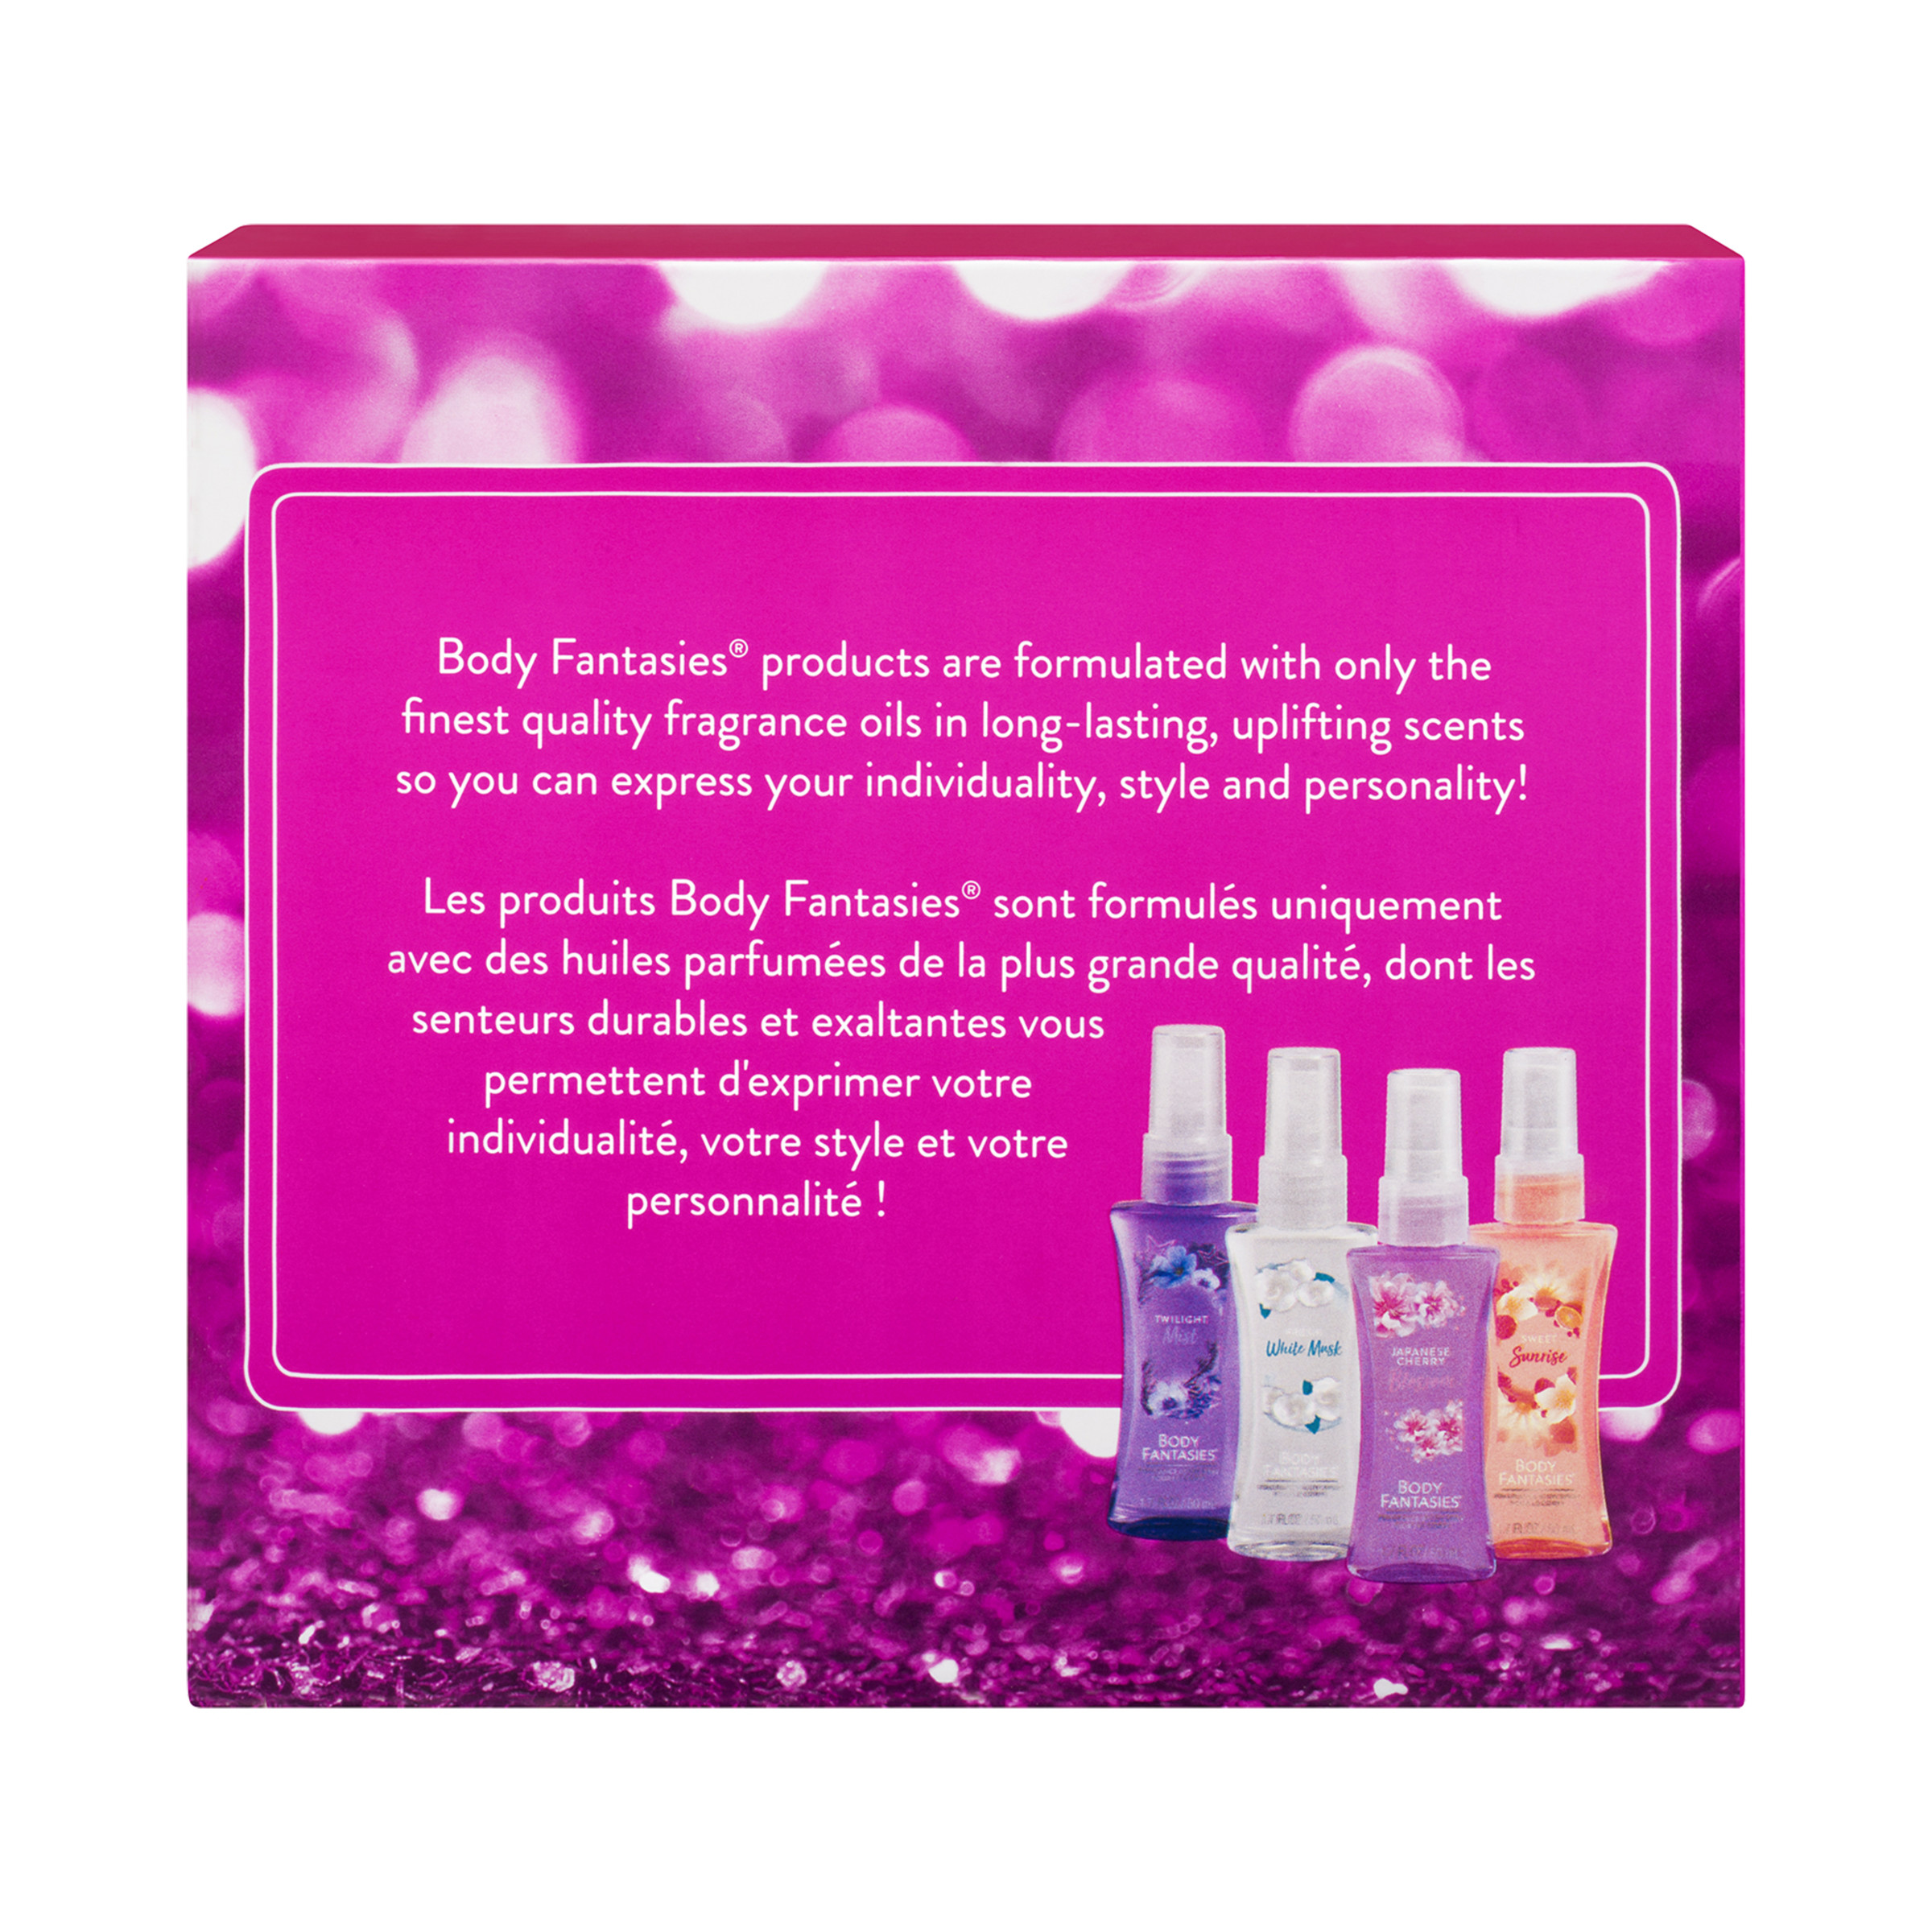 Body Fantasies Signature Fragrance Body Spray Gift Set for Women, 1.7 fl oz, 4 Count - image 4 of 6